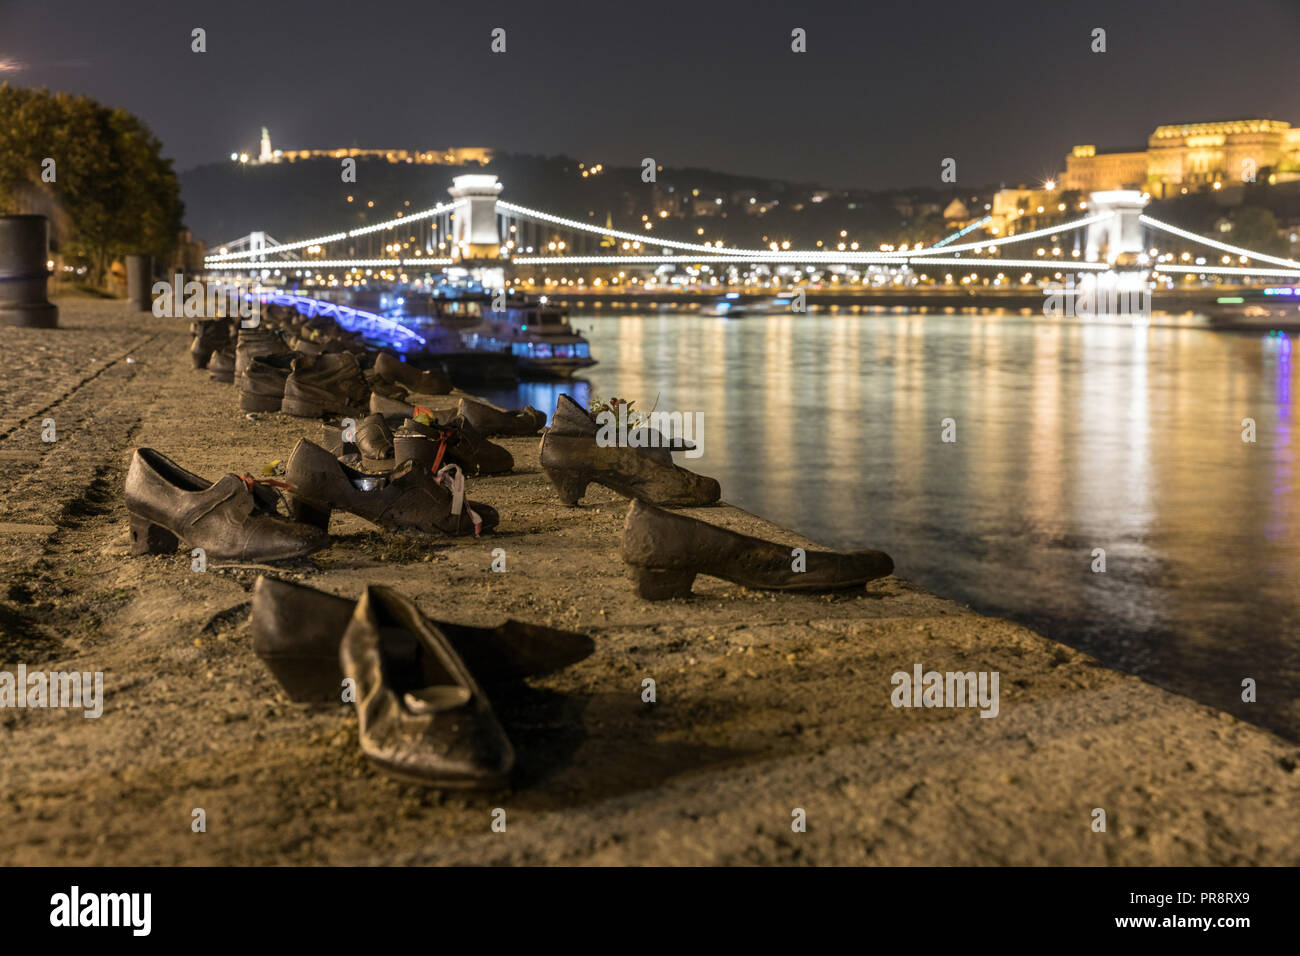 A poignant memorial on the bank of the Danube in Budapest are these cast iron shoes sculpted by Gyula Pauer and conceived by Can Togay. The shoes comm Stock Photo